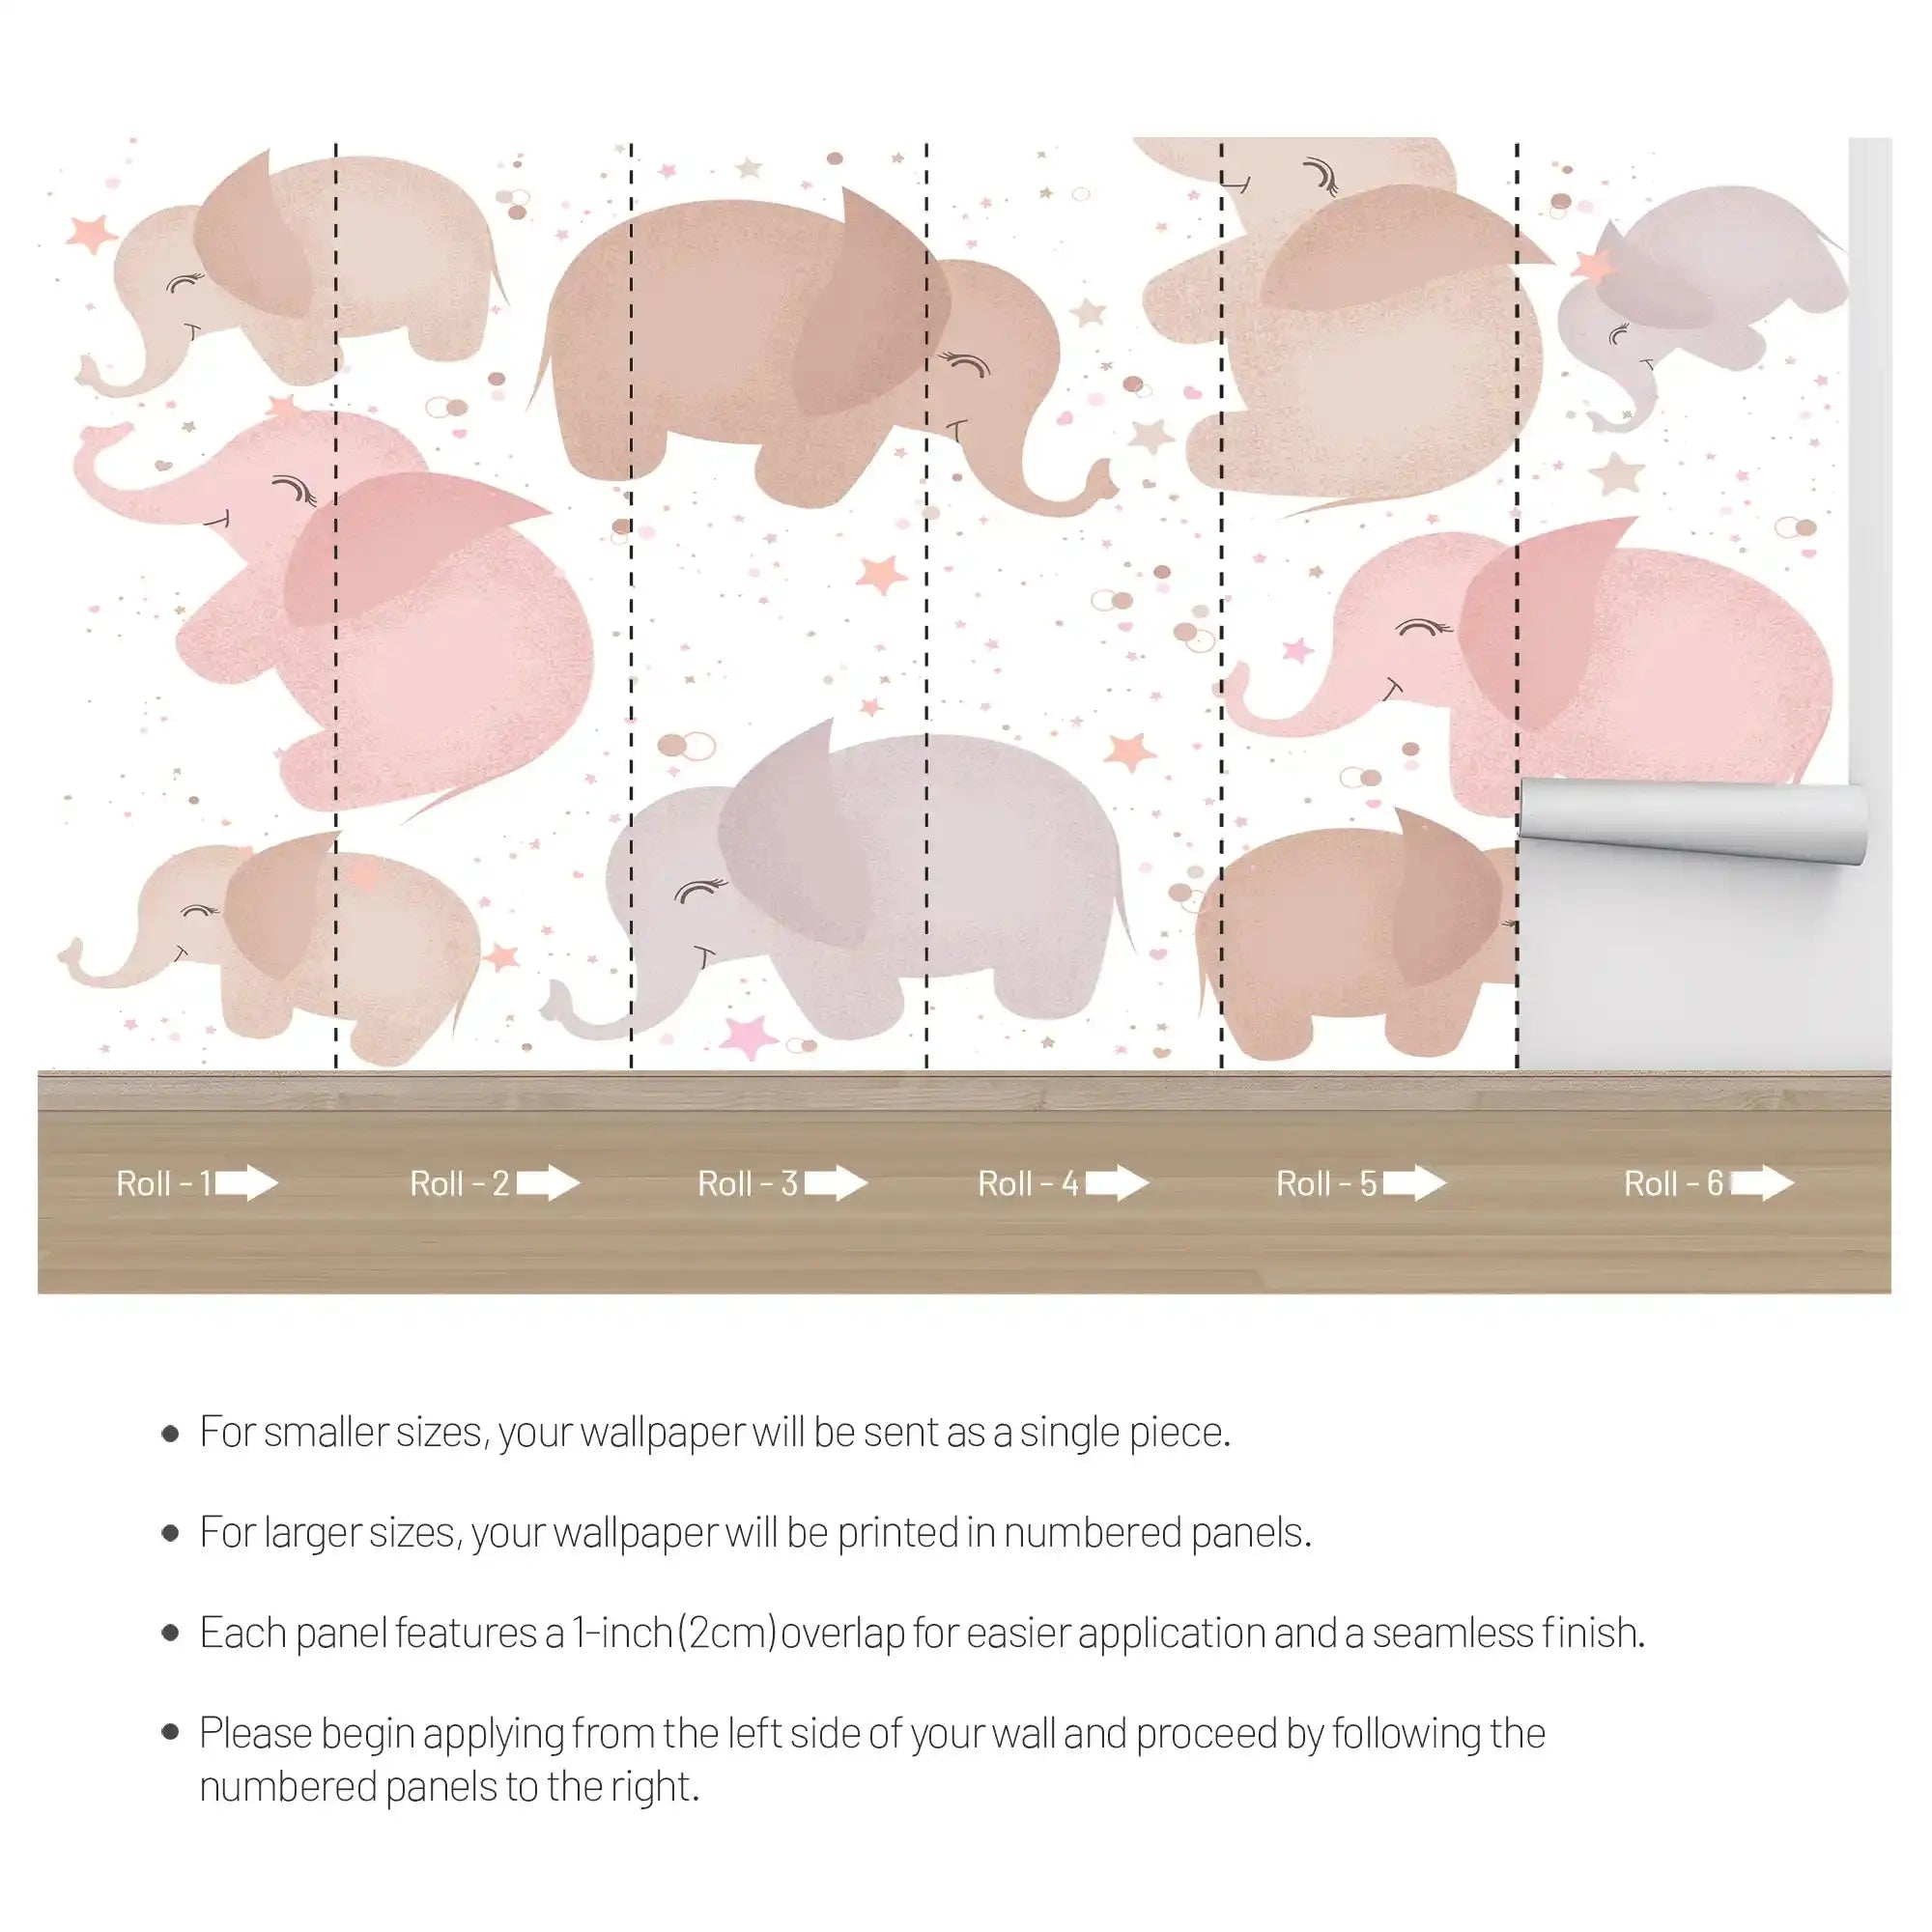 6016 / Baby Room Fun Wallpaper: Kid-friendly, Removable with Elephants and Stars for DIY Nursery Mural - Artevella